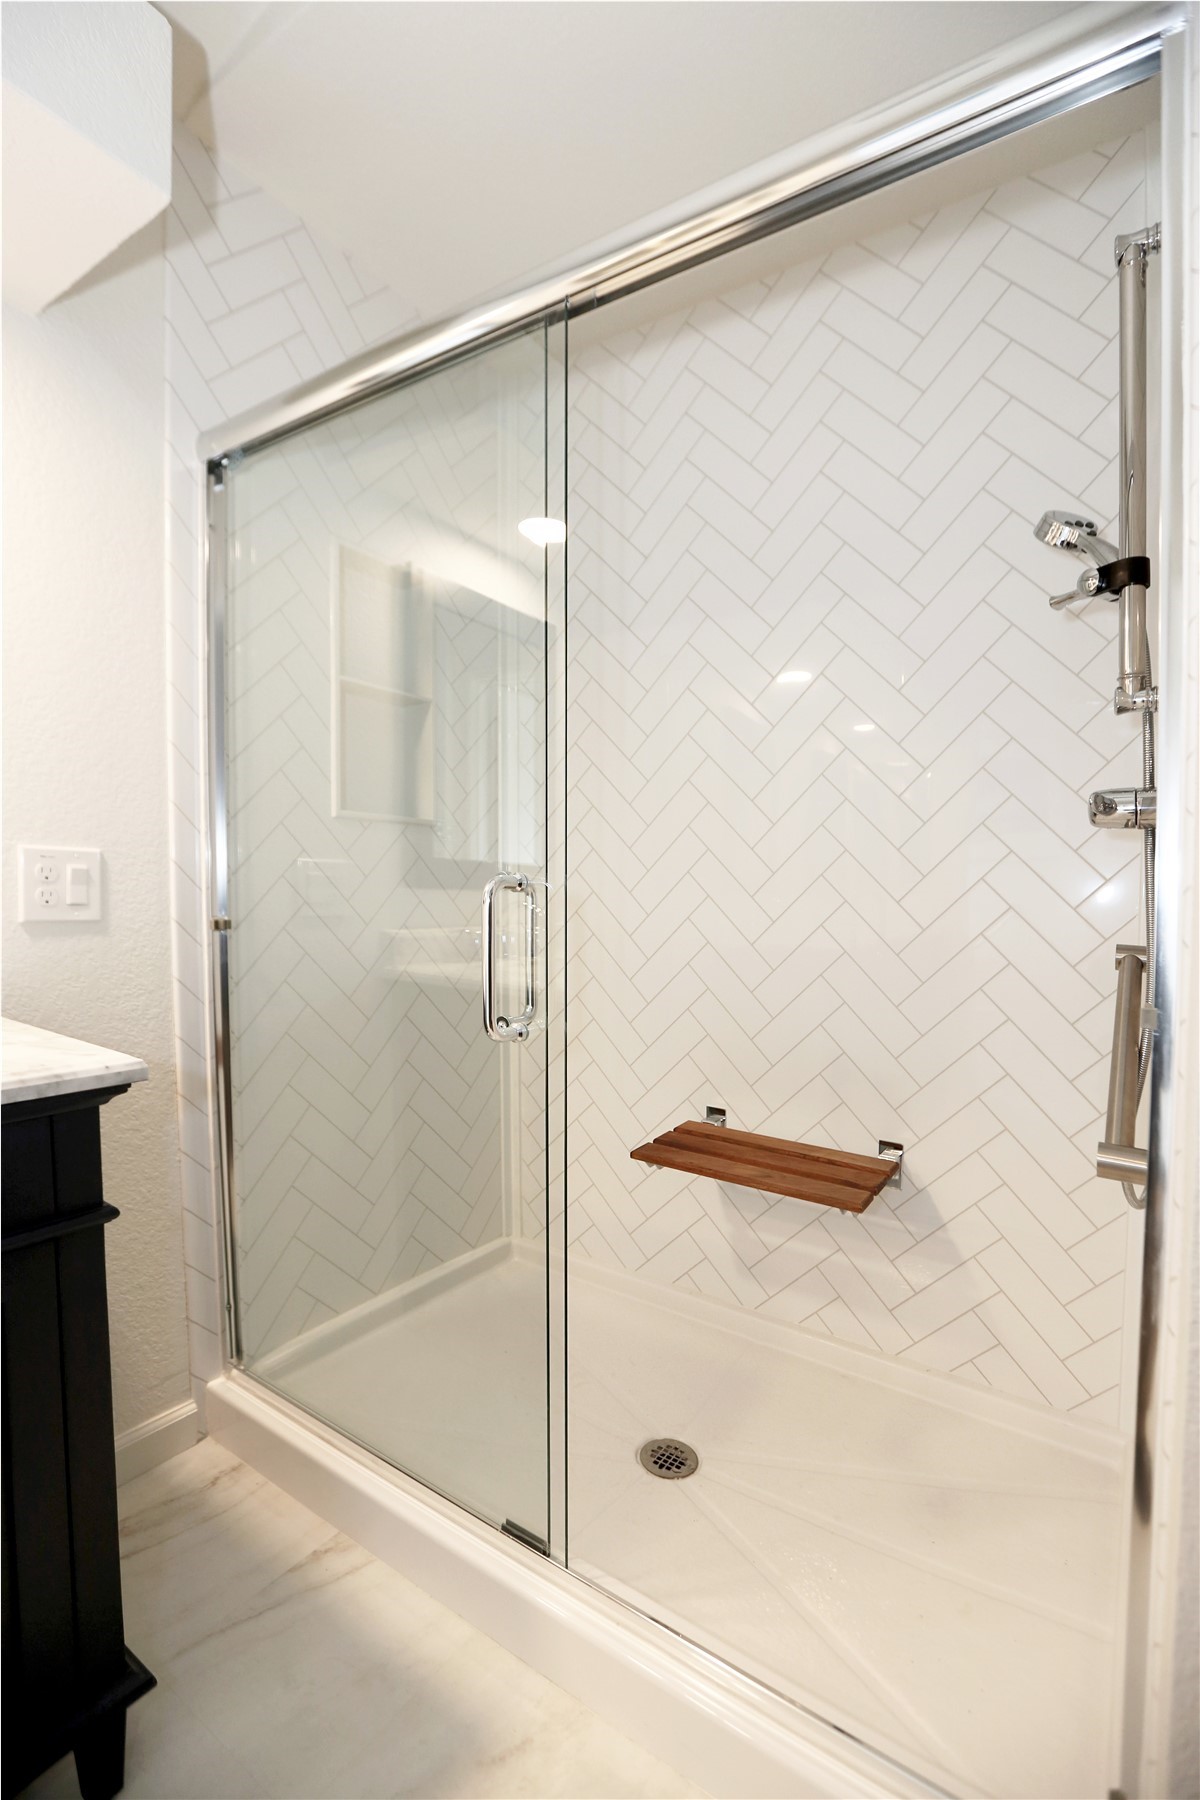 The Beauty of Texture During Your Bathroom Remodel